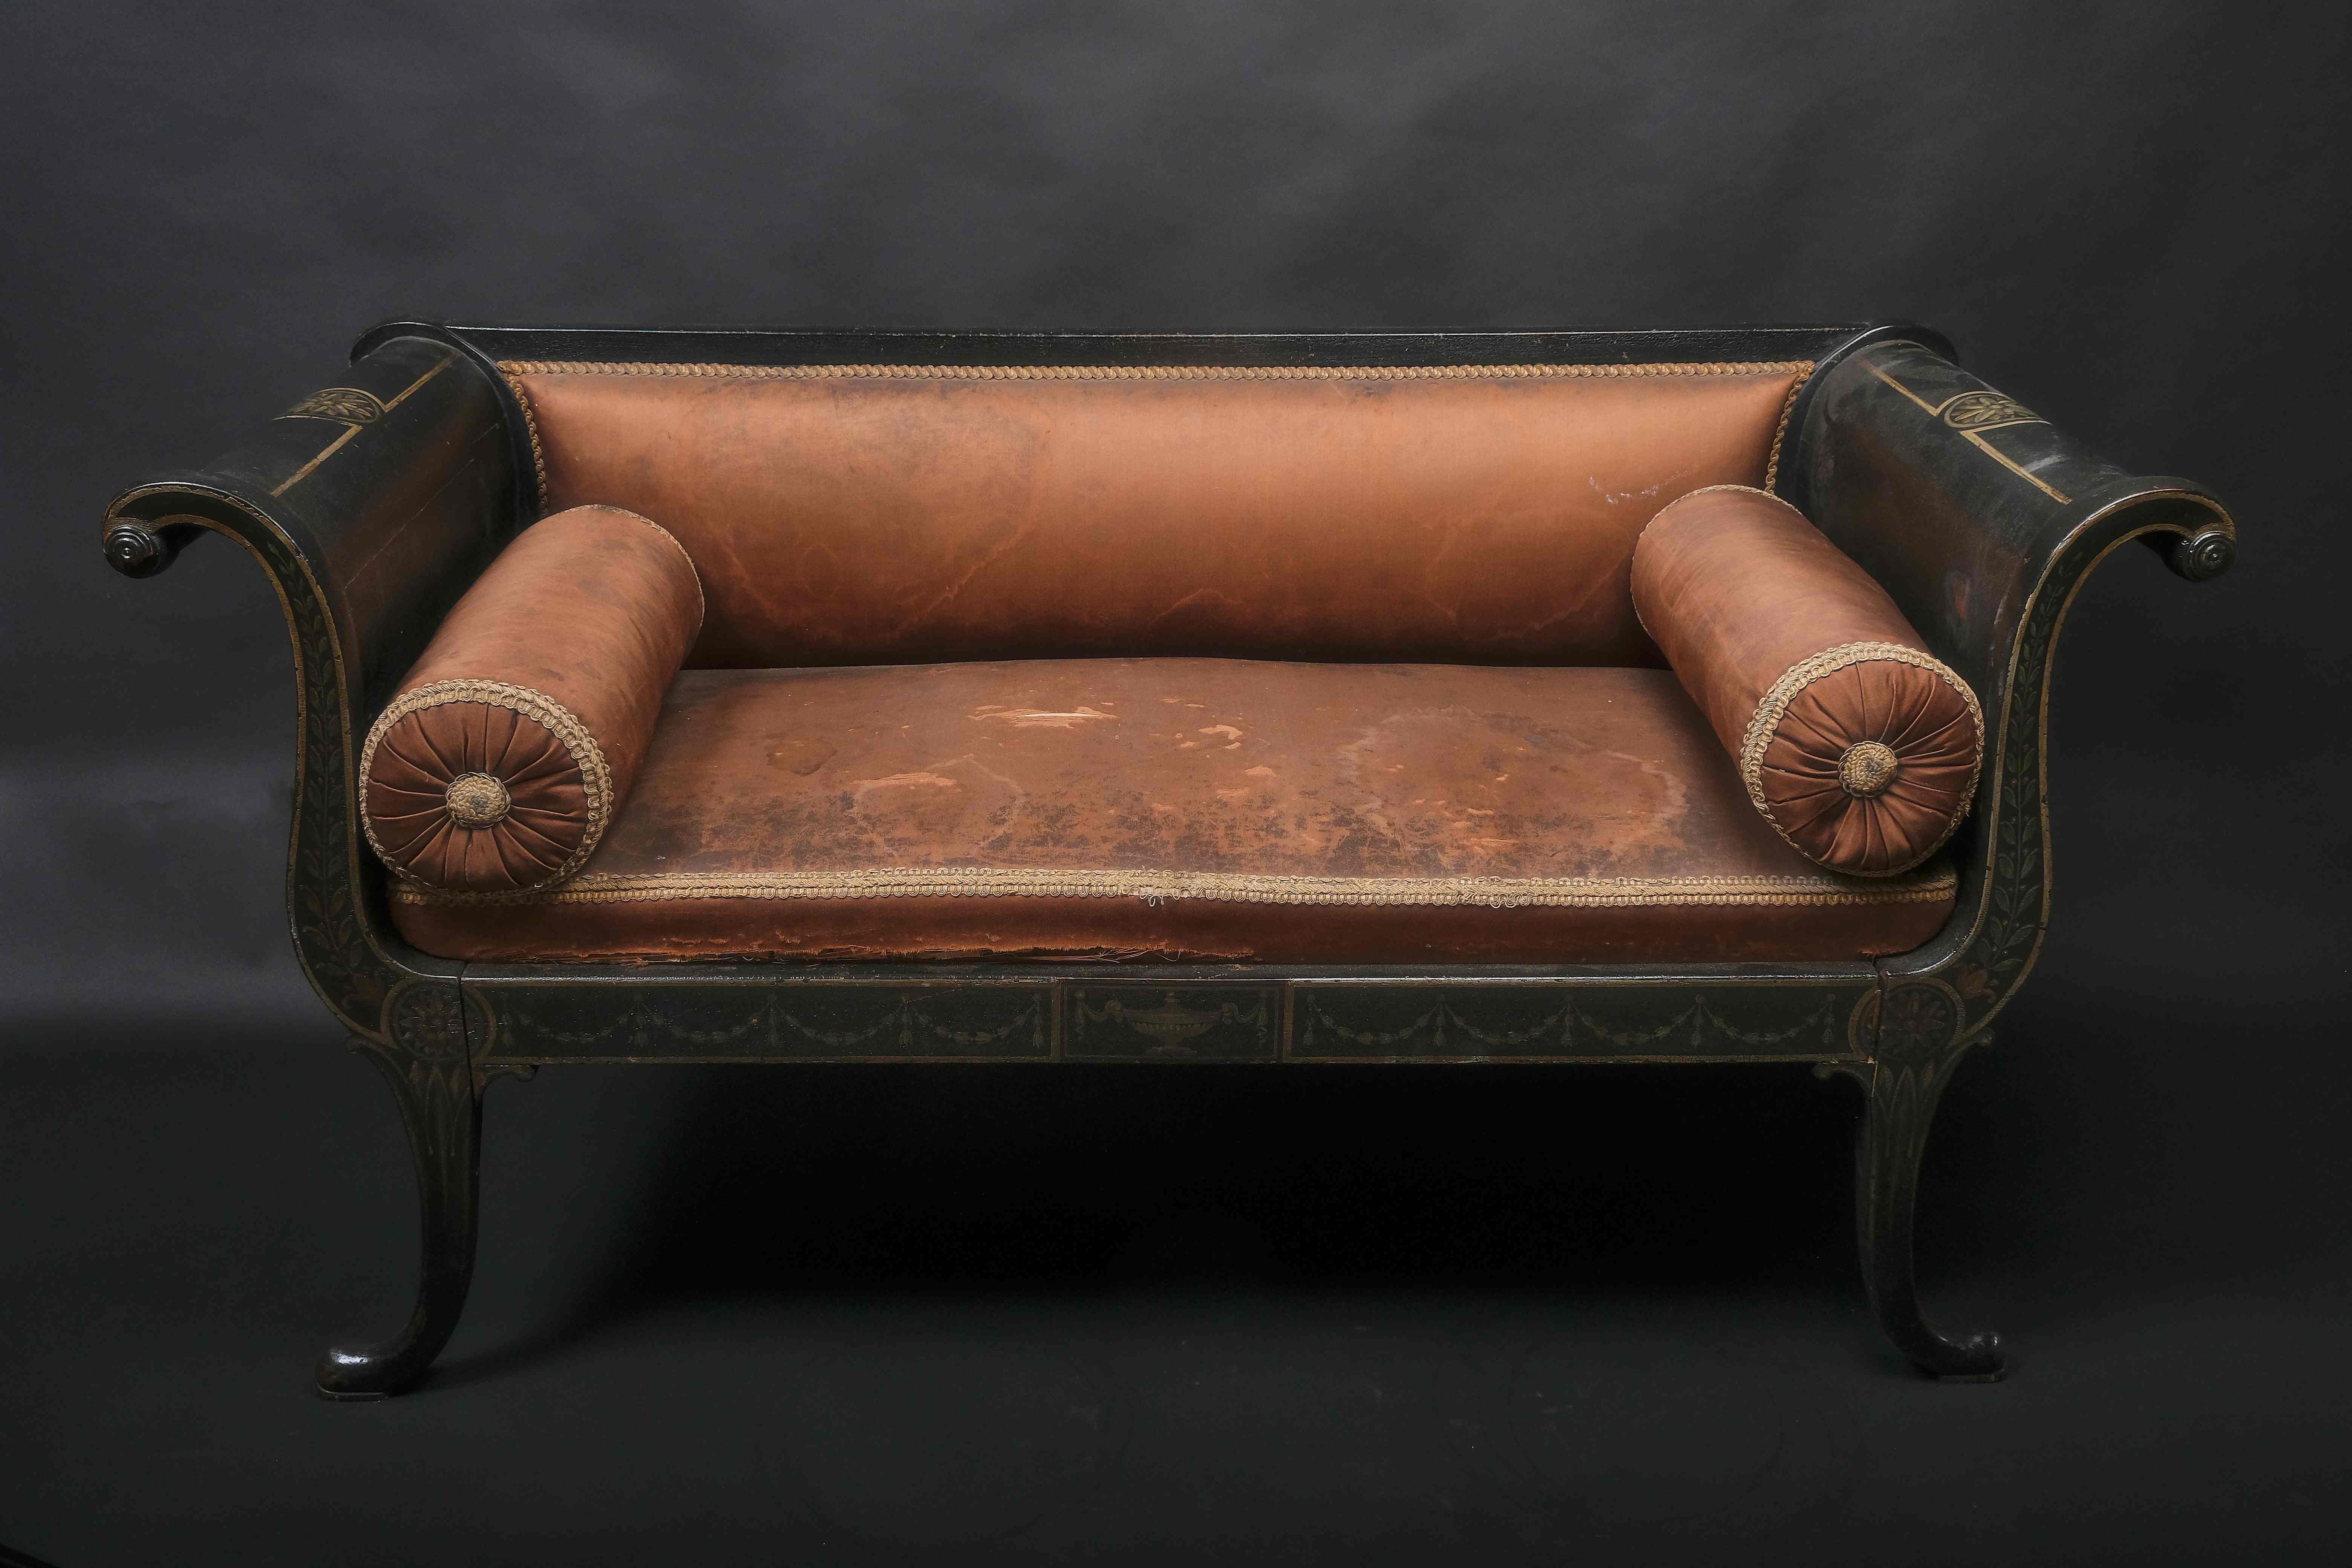 An elegant Gondola-shaped bench with flared padfeet. Floral painting in grisaille on black lacquer. Upholstered seat with padded side wheels. With its not too large size it fits nearly every situation wether in an appartment or house. Elegant and